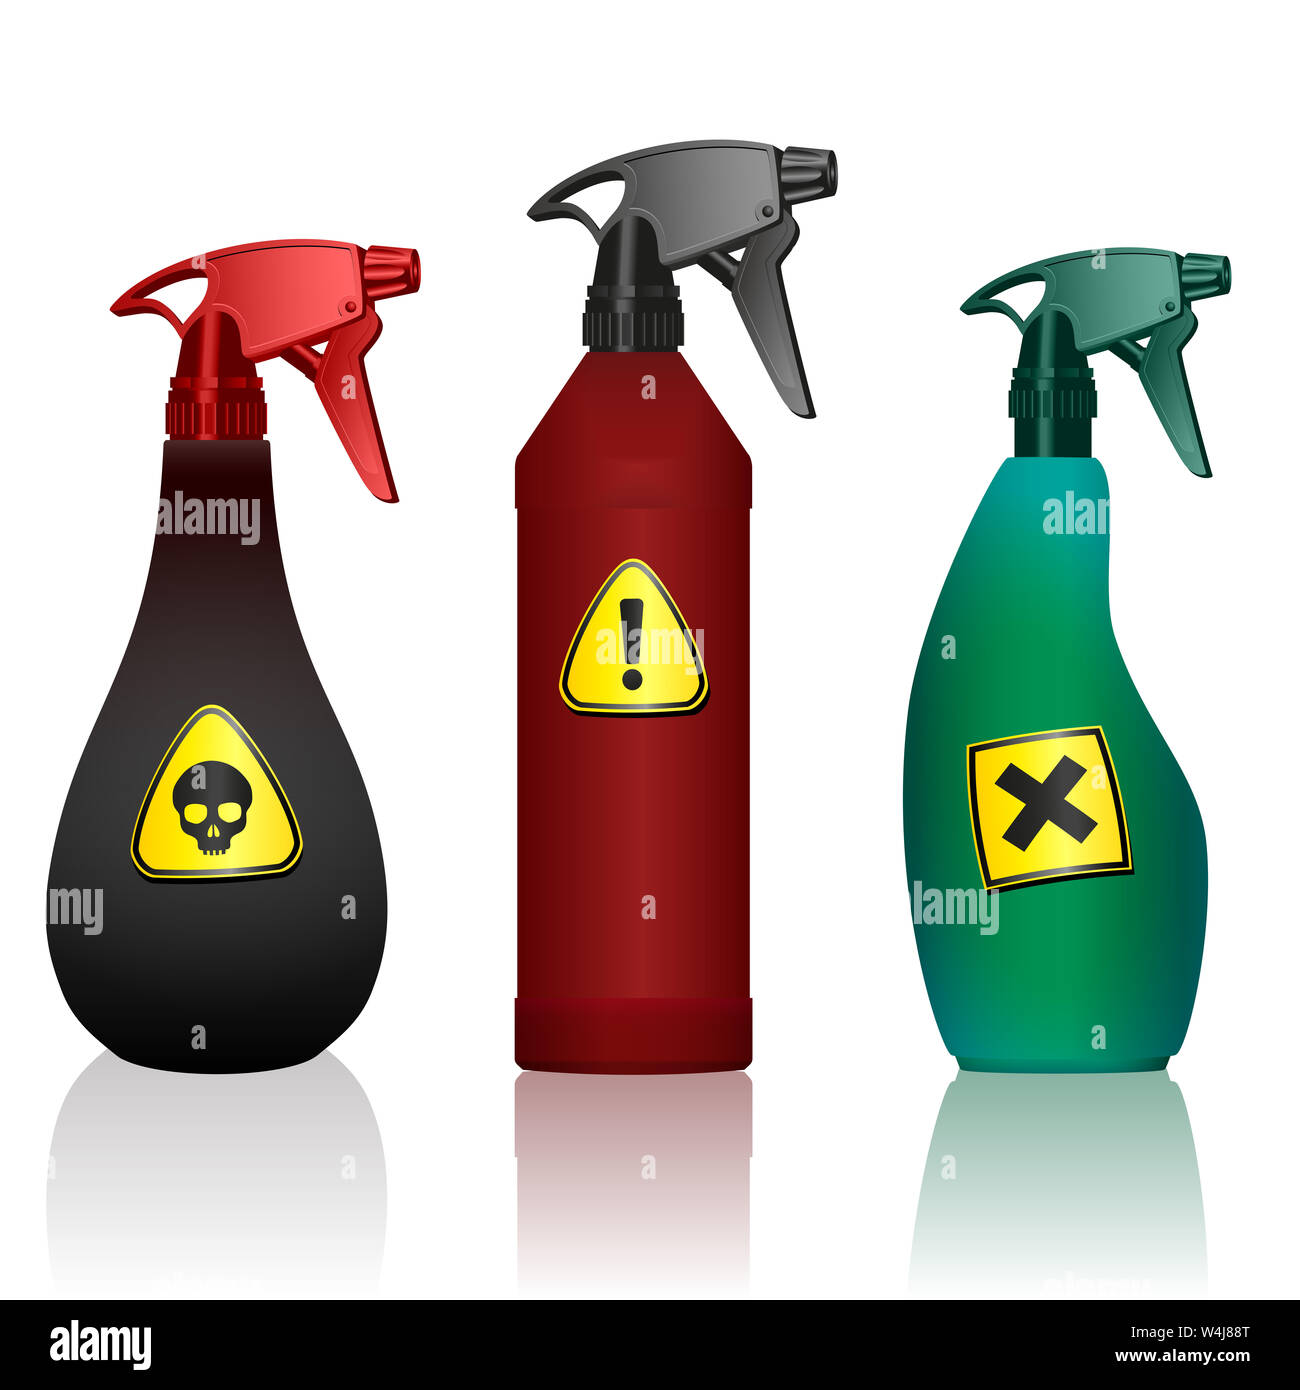 Poison spray bottles. Toxins, insecticides, pesticides, biocides with hazard warning signs. Caution poisonous,  on white background. Stock Photo